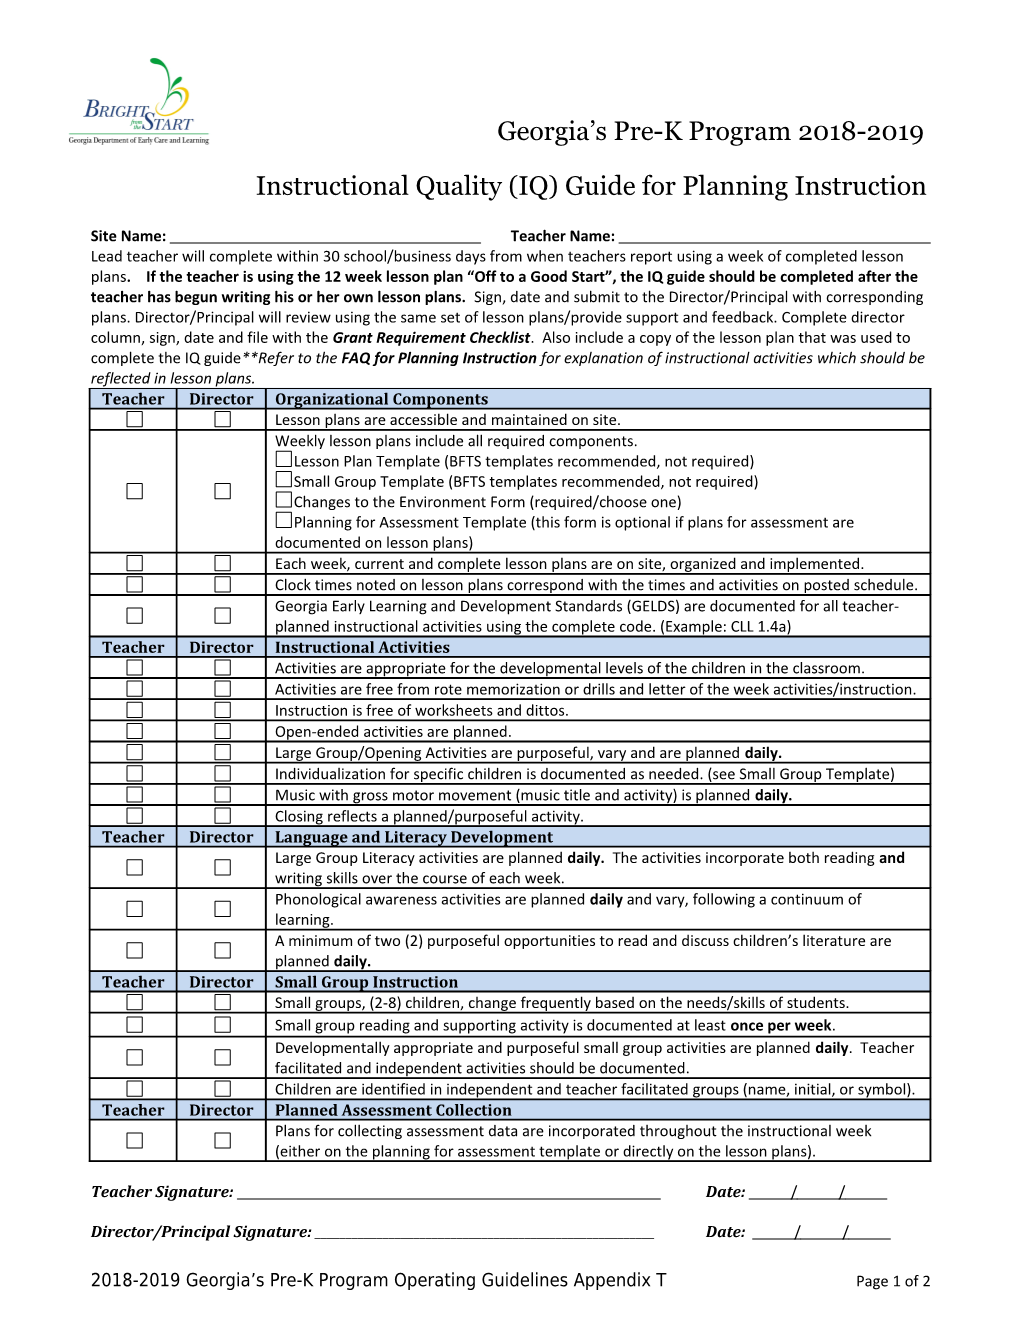 Instructional Quality (IQ) Guide for Planning Instruction